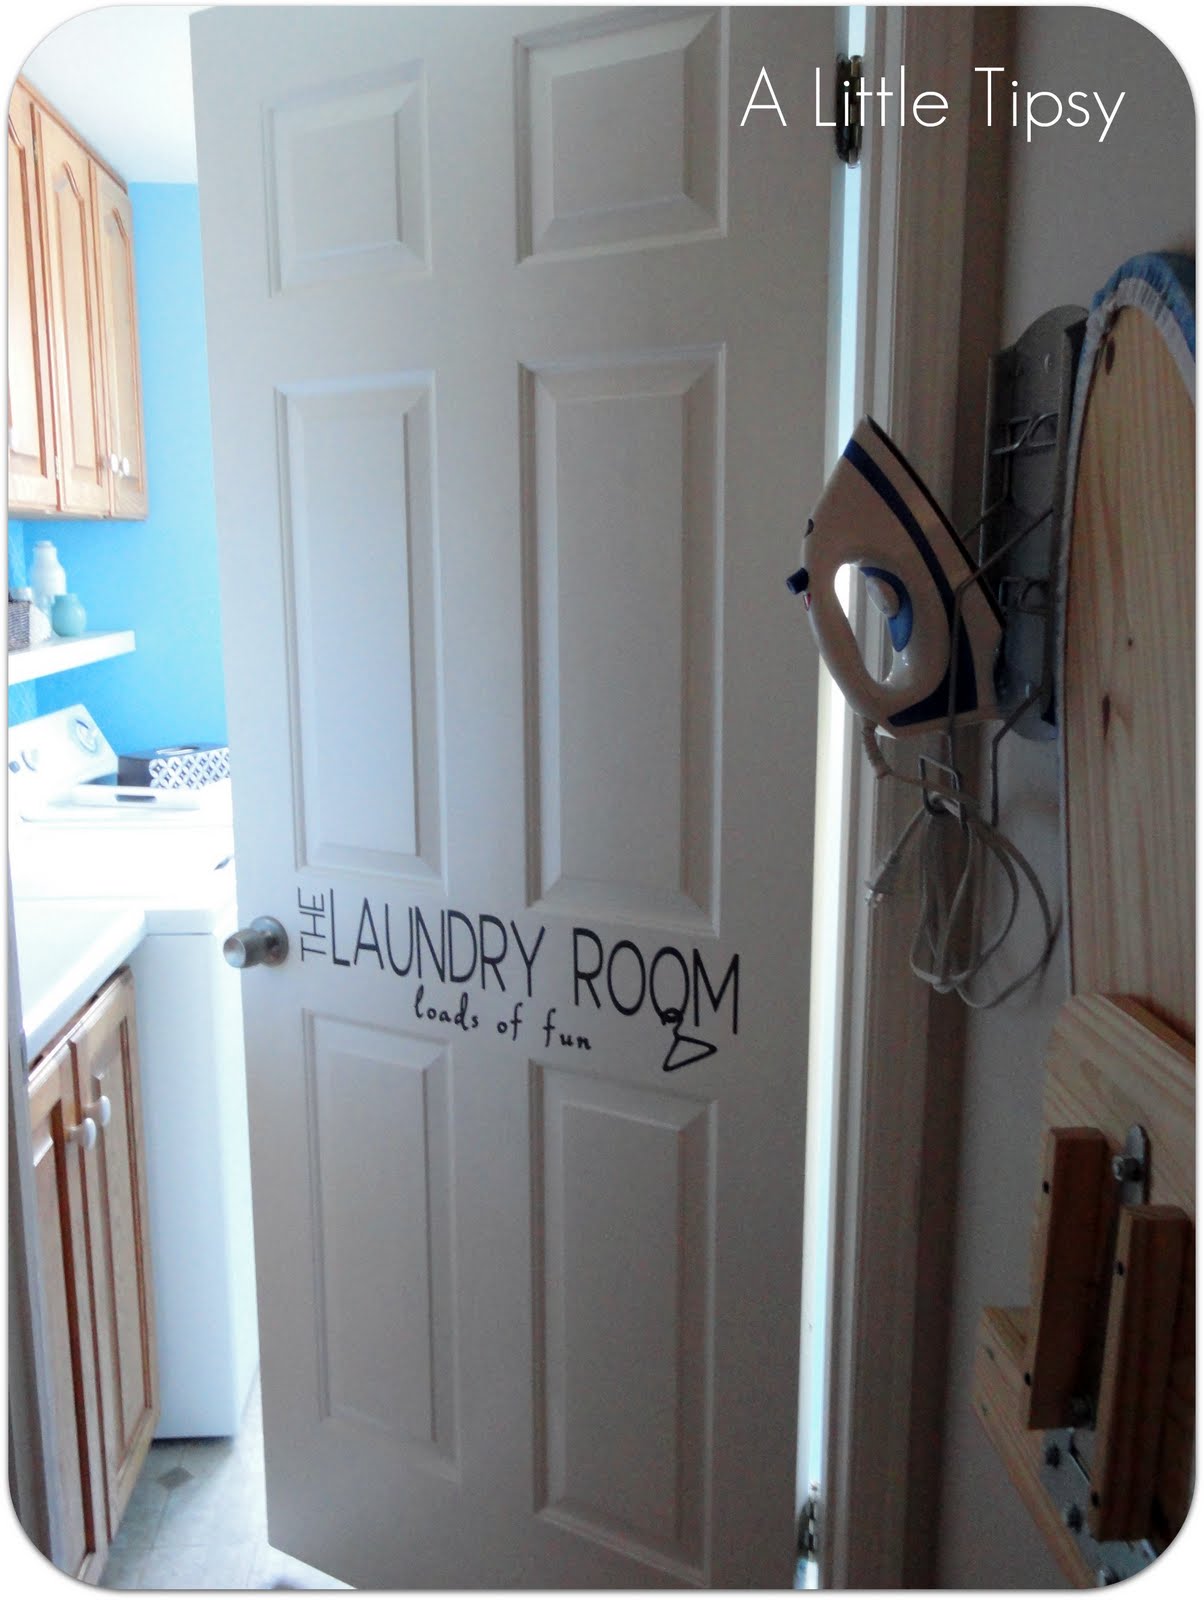 DIY Laundry Room - A Little Tipsy